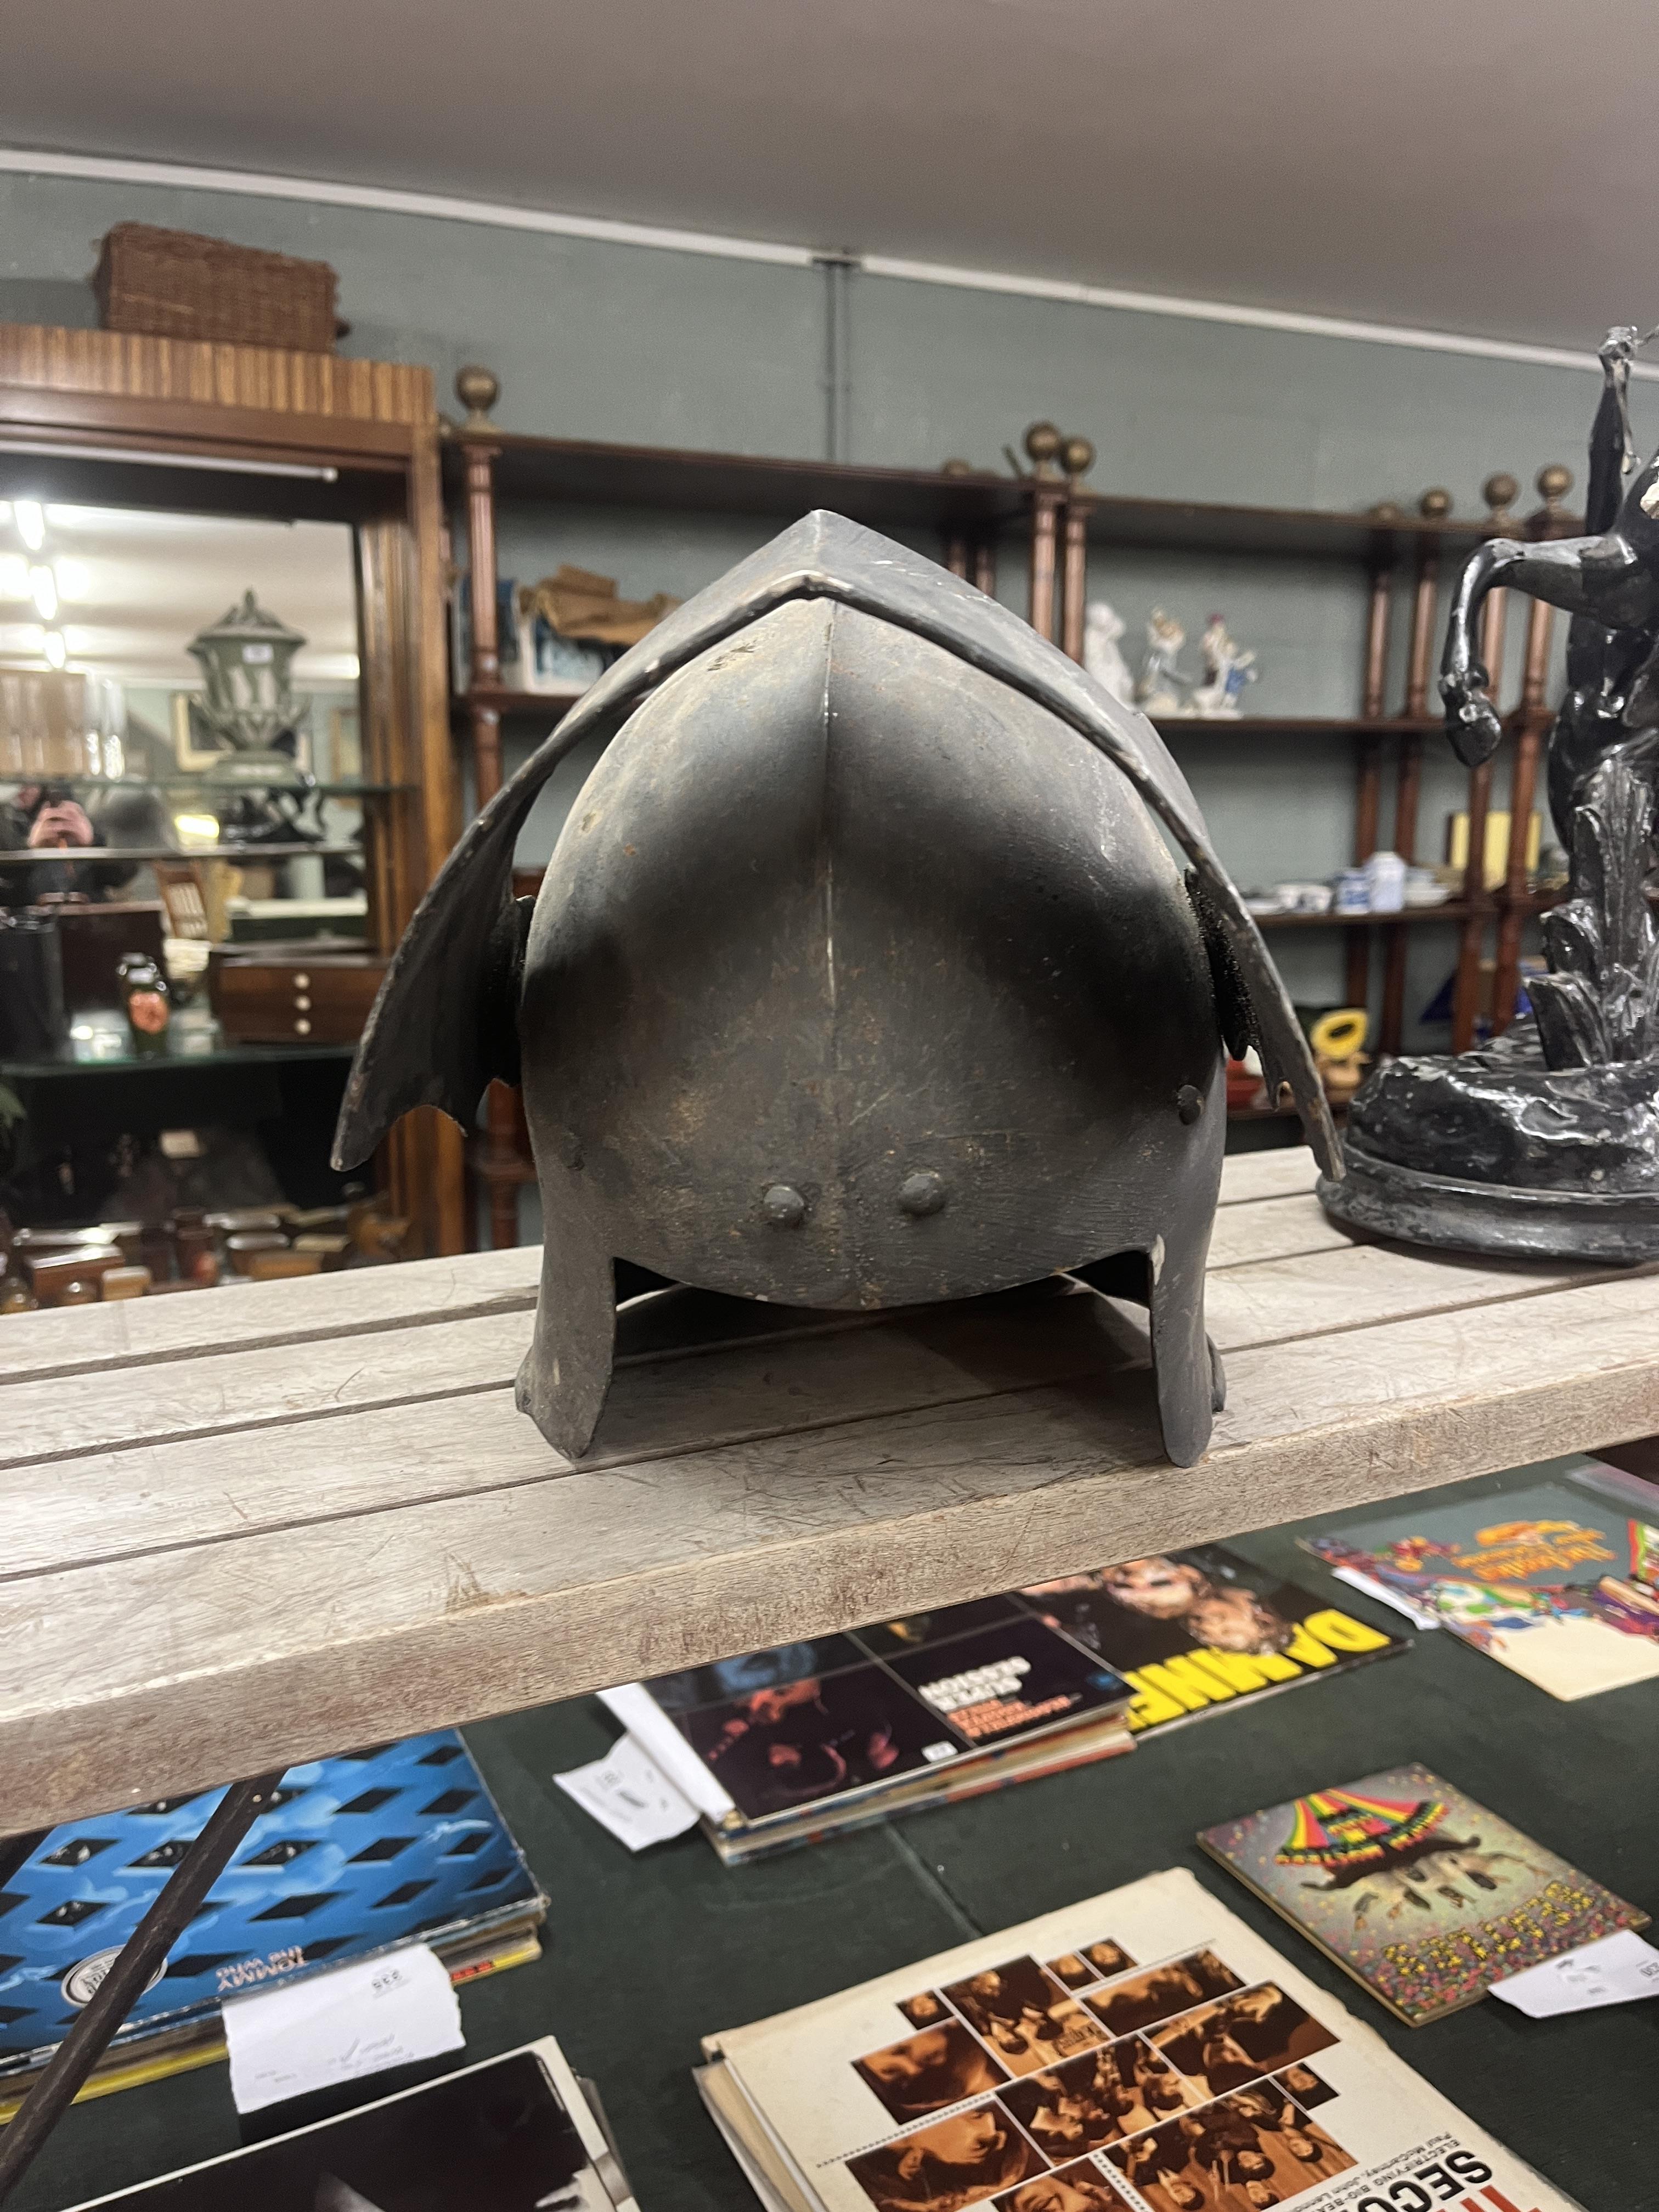 Reproduction medieval sallet style helmet - Image 2 of 3